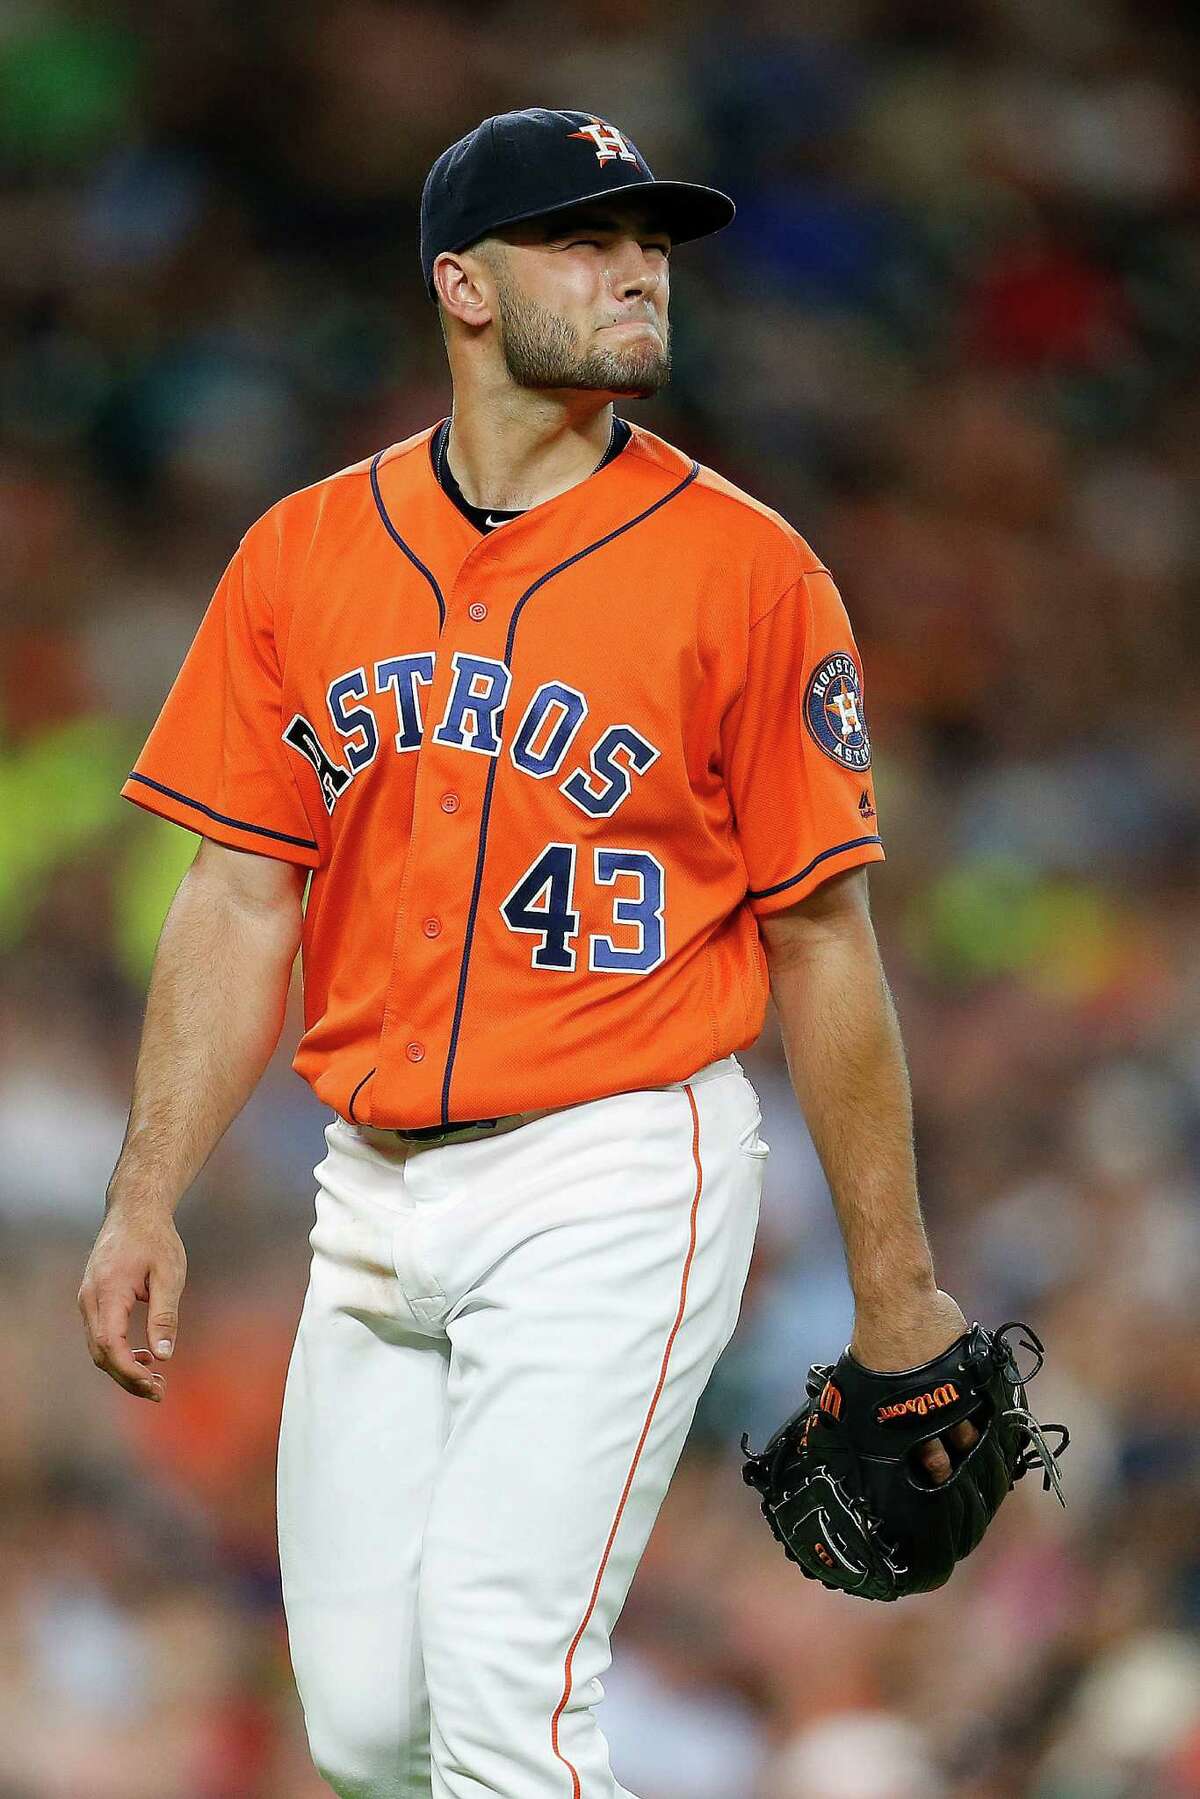 Houston Astros starting pitcher Lance McCullers (43) reacts after striking out Los Angeles Angels Mike Trout to end the third inning of an MLB baseball game at Minute Maid Park, Friday, July 22, 2016, in Houston.